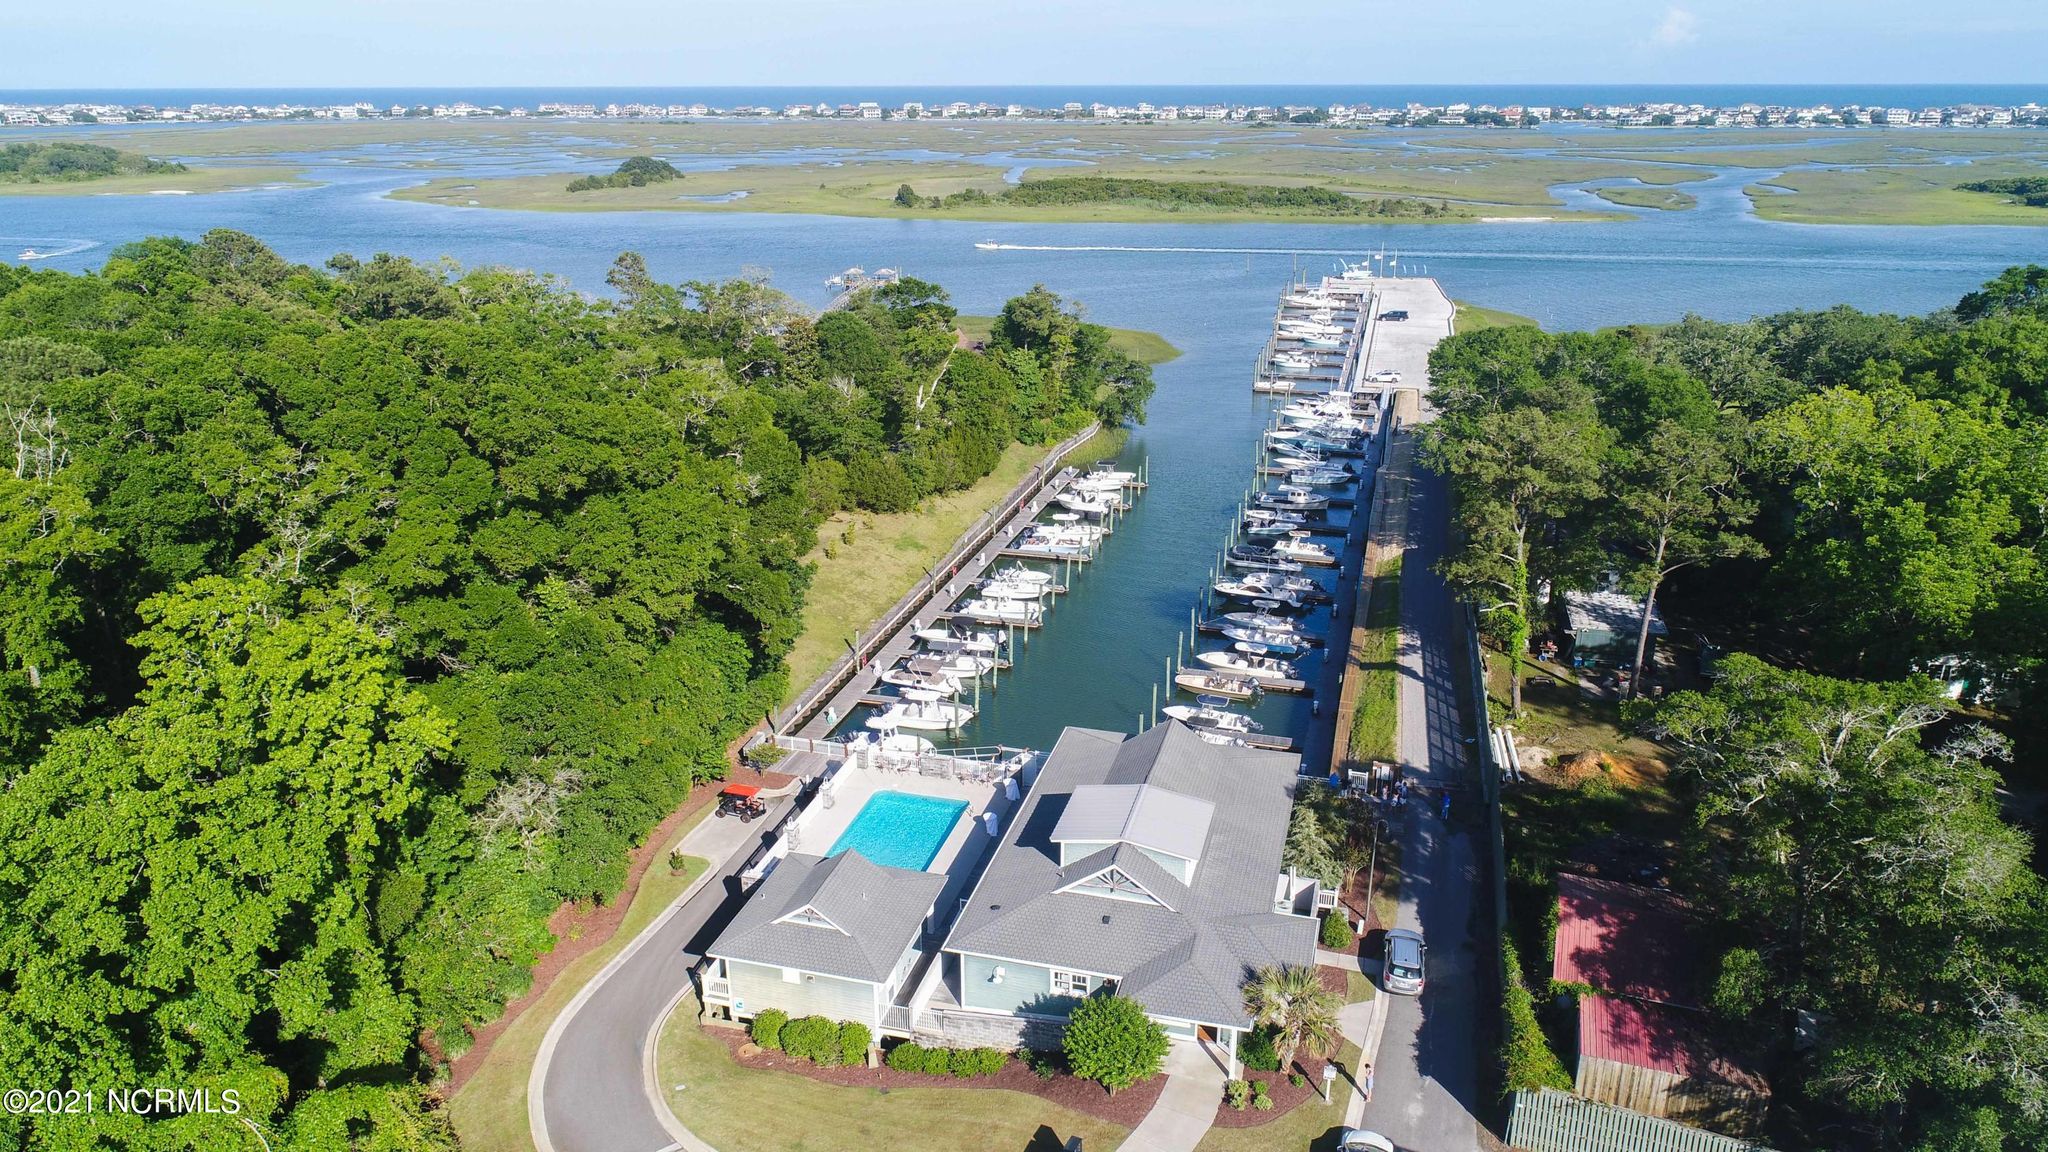 rent a yacht wilmington nc